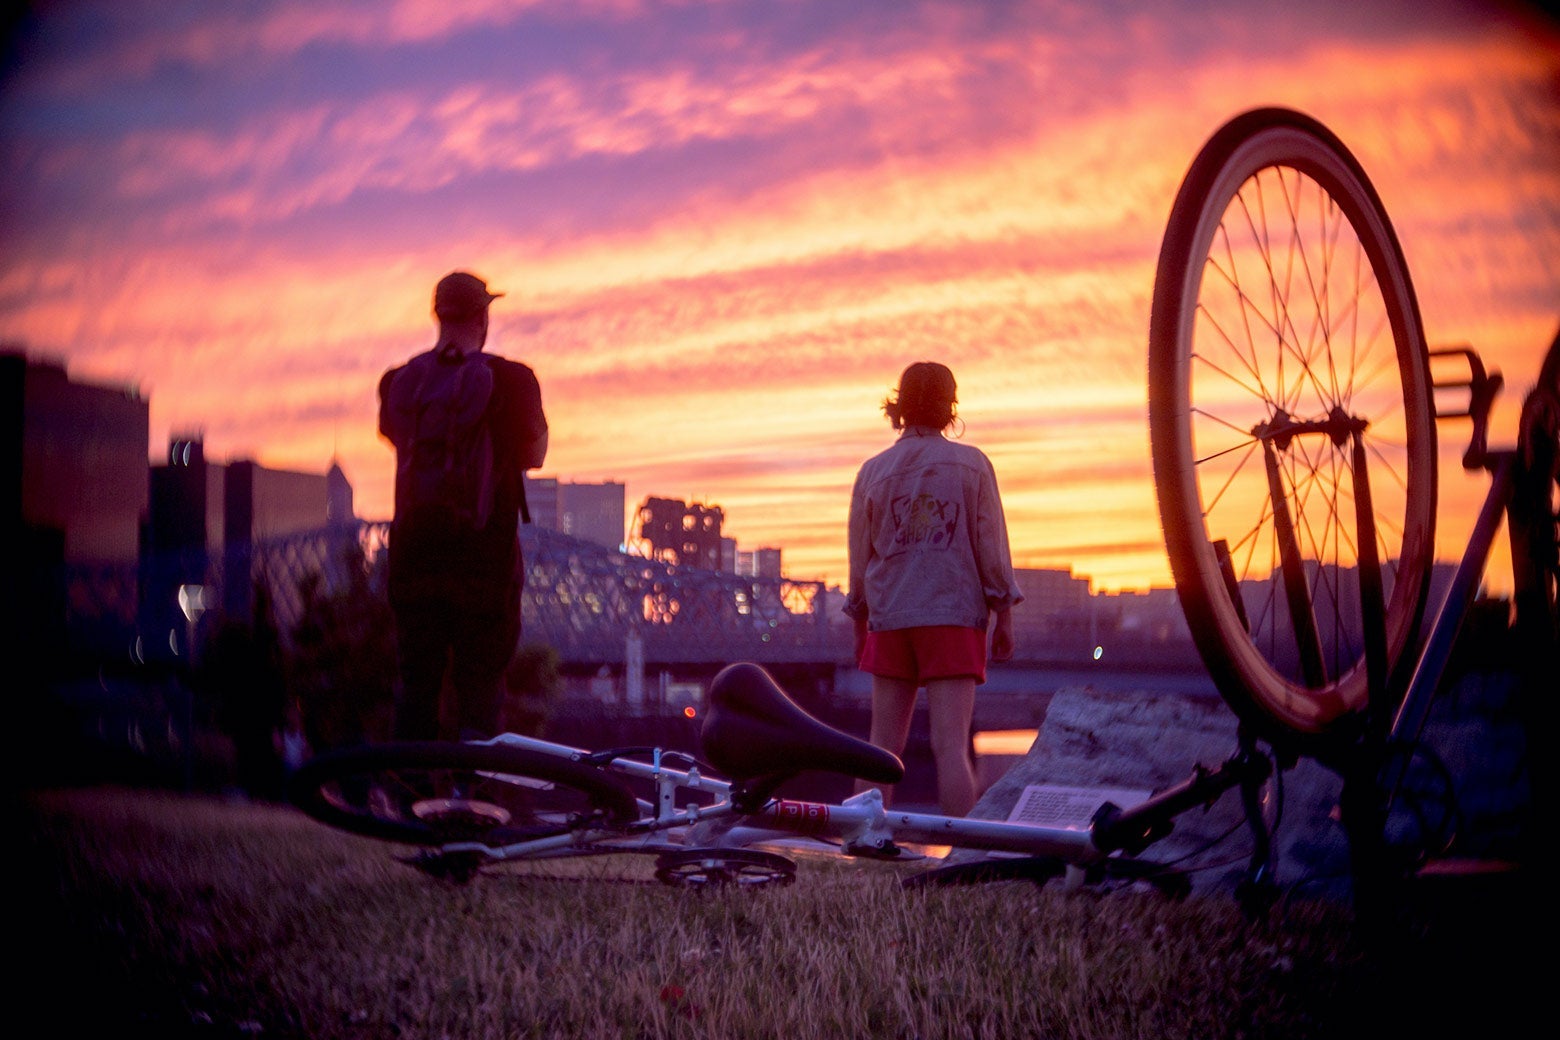 A bicycle is seen lying on the ground. Two people stand in front of it.